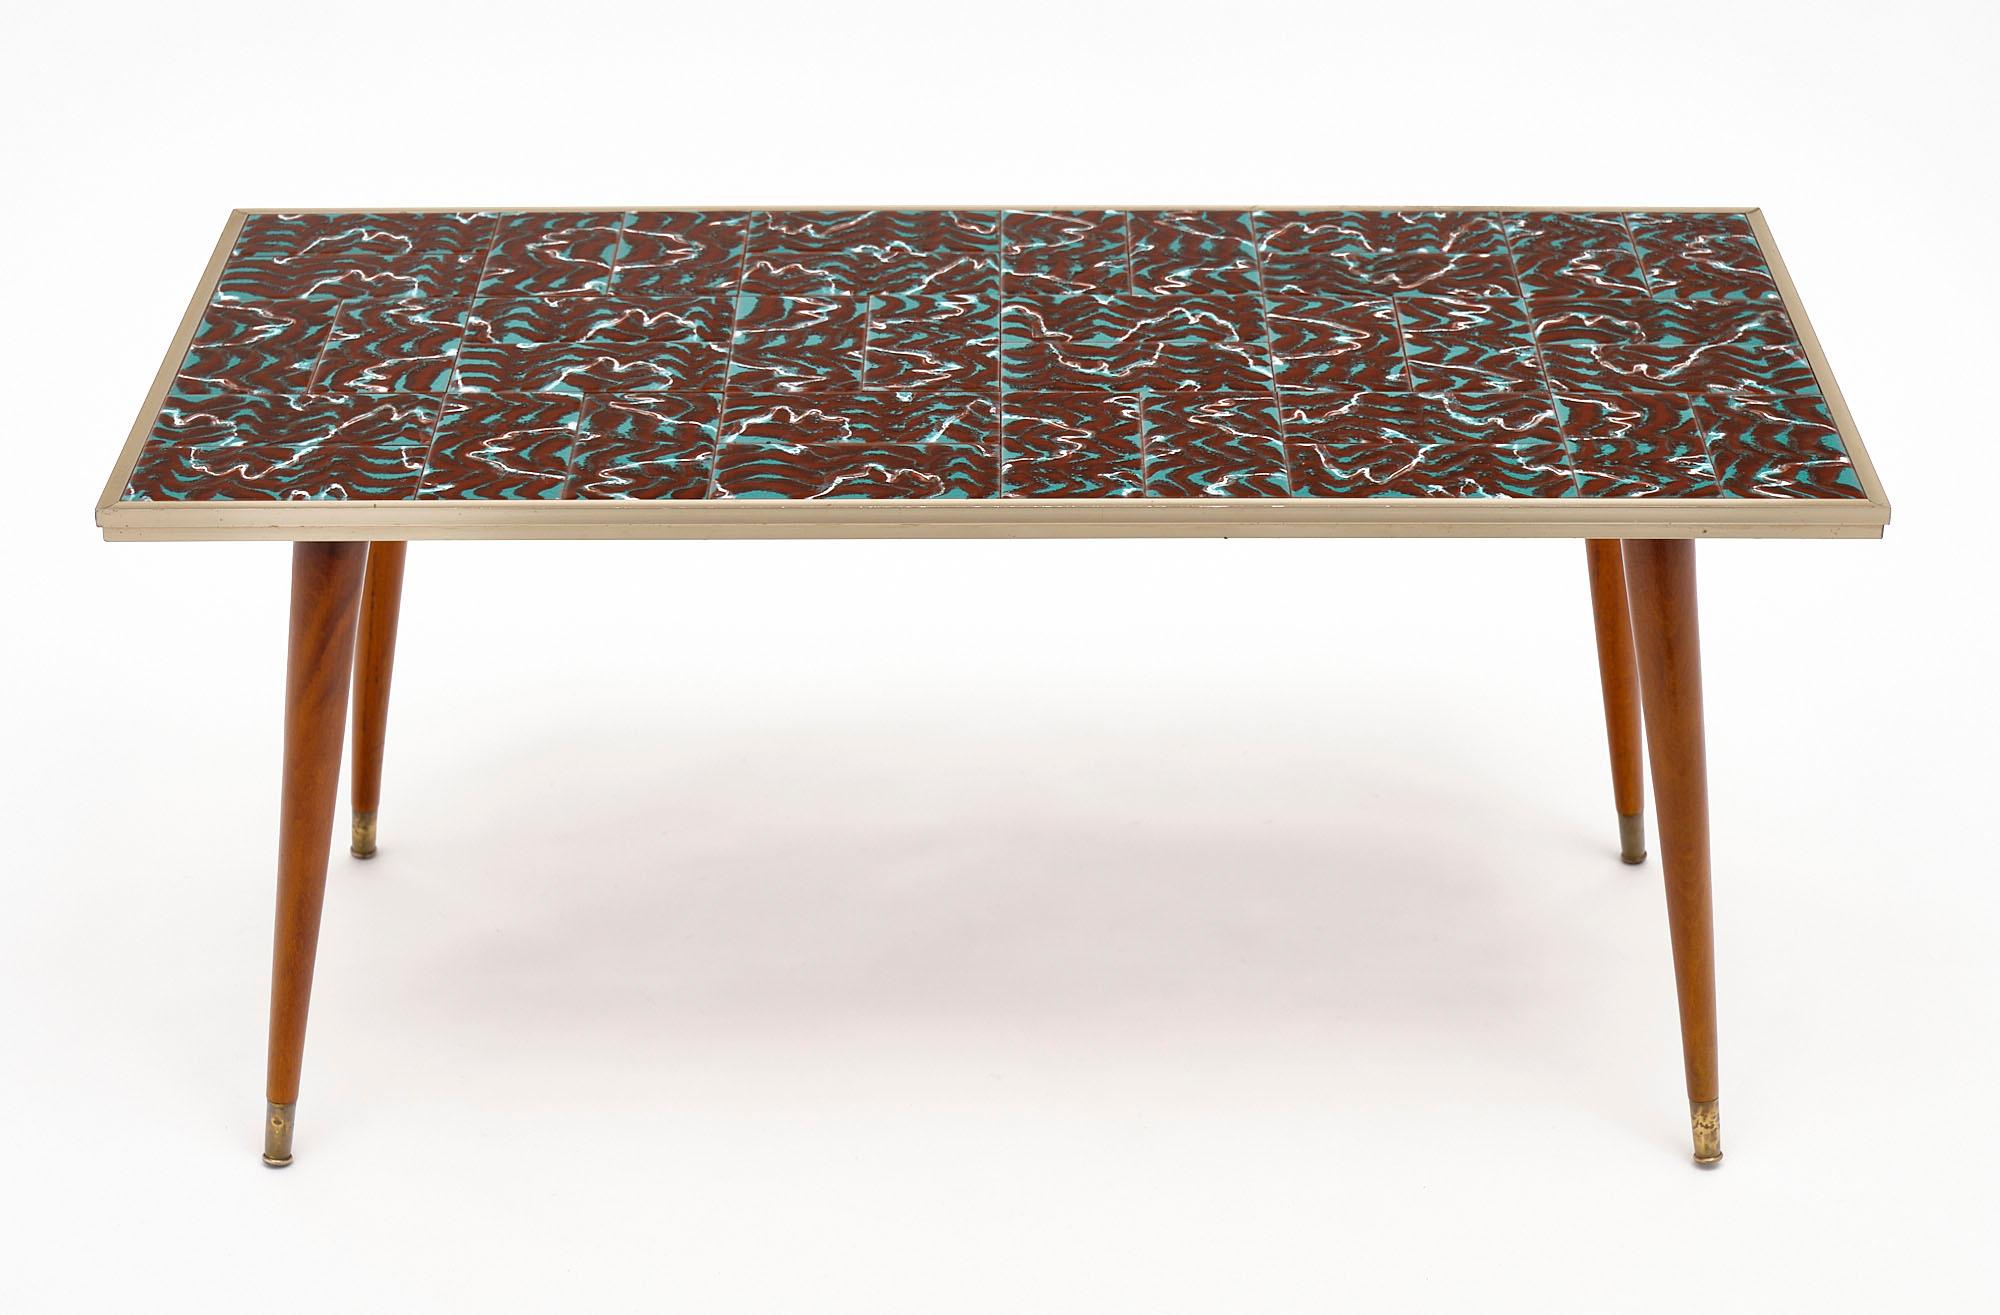 Polychrome French tiled coffee table from Vallauris. The tile work is framed in metal trim and supported by four tapered legs. The wooden legs are finished with a lustrous French polish.